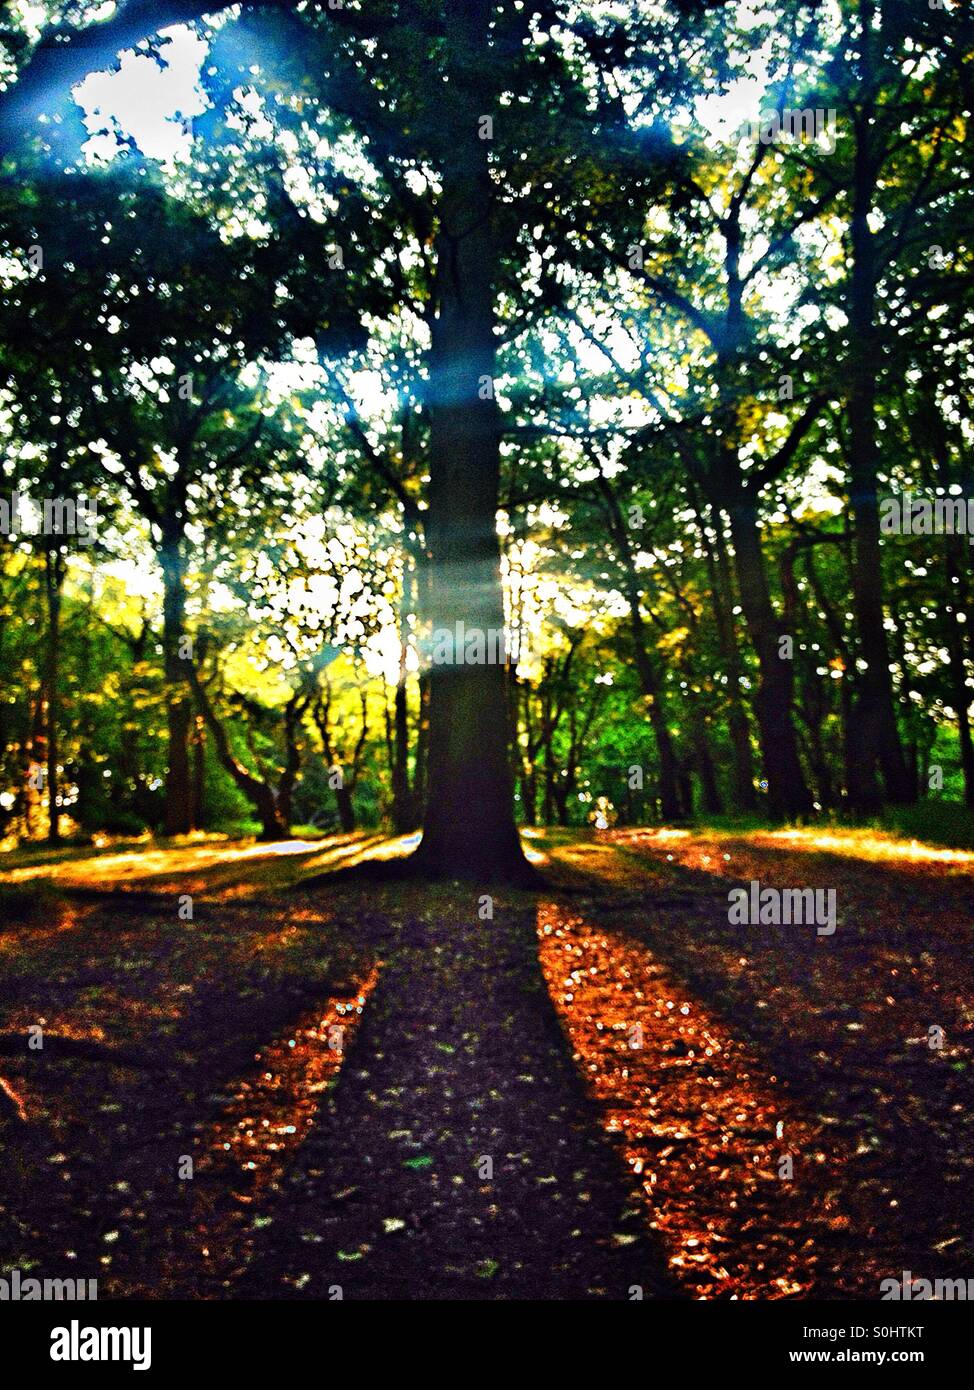 Tree in the woods casting a shadow and sun shining through leaves Stock Photo